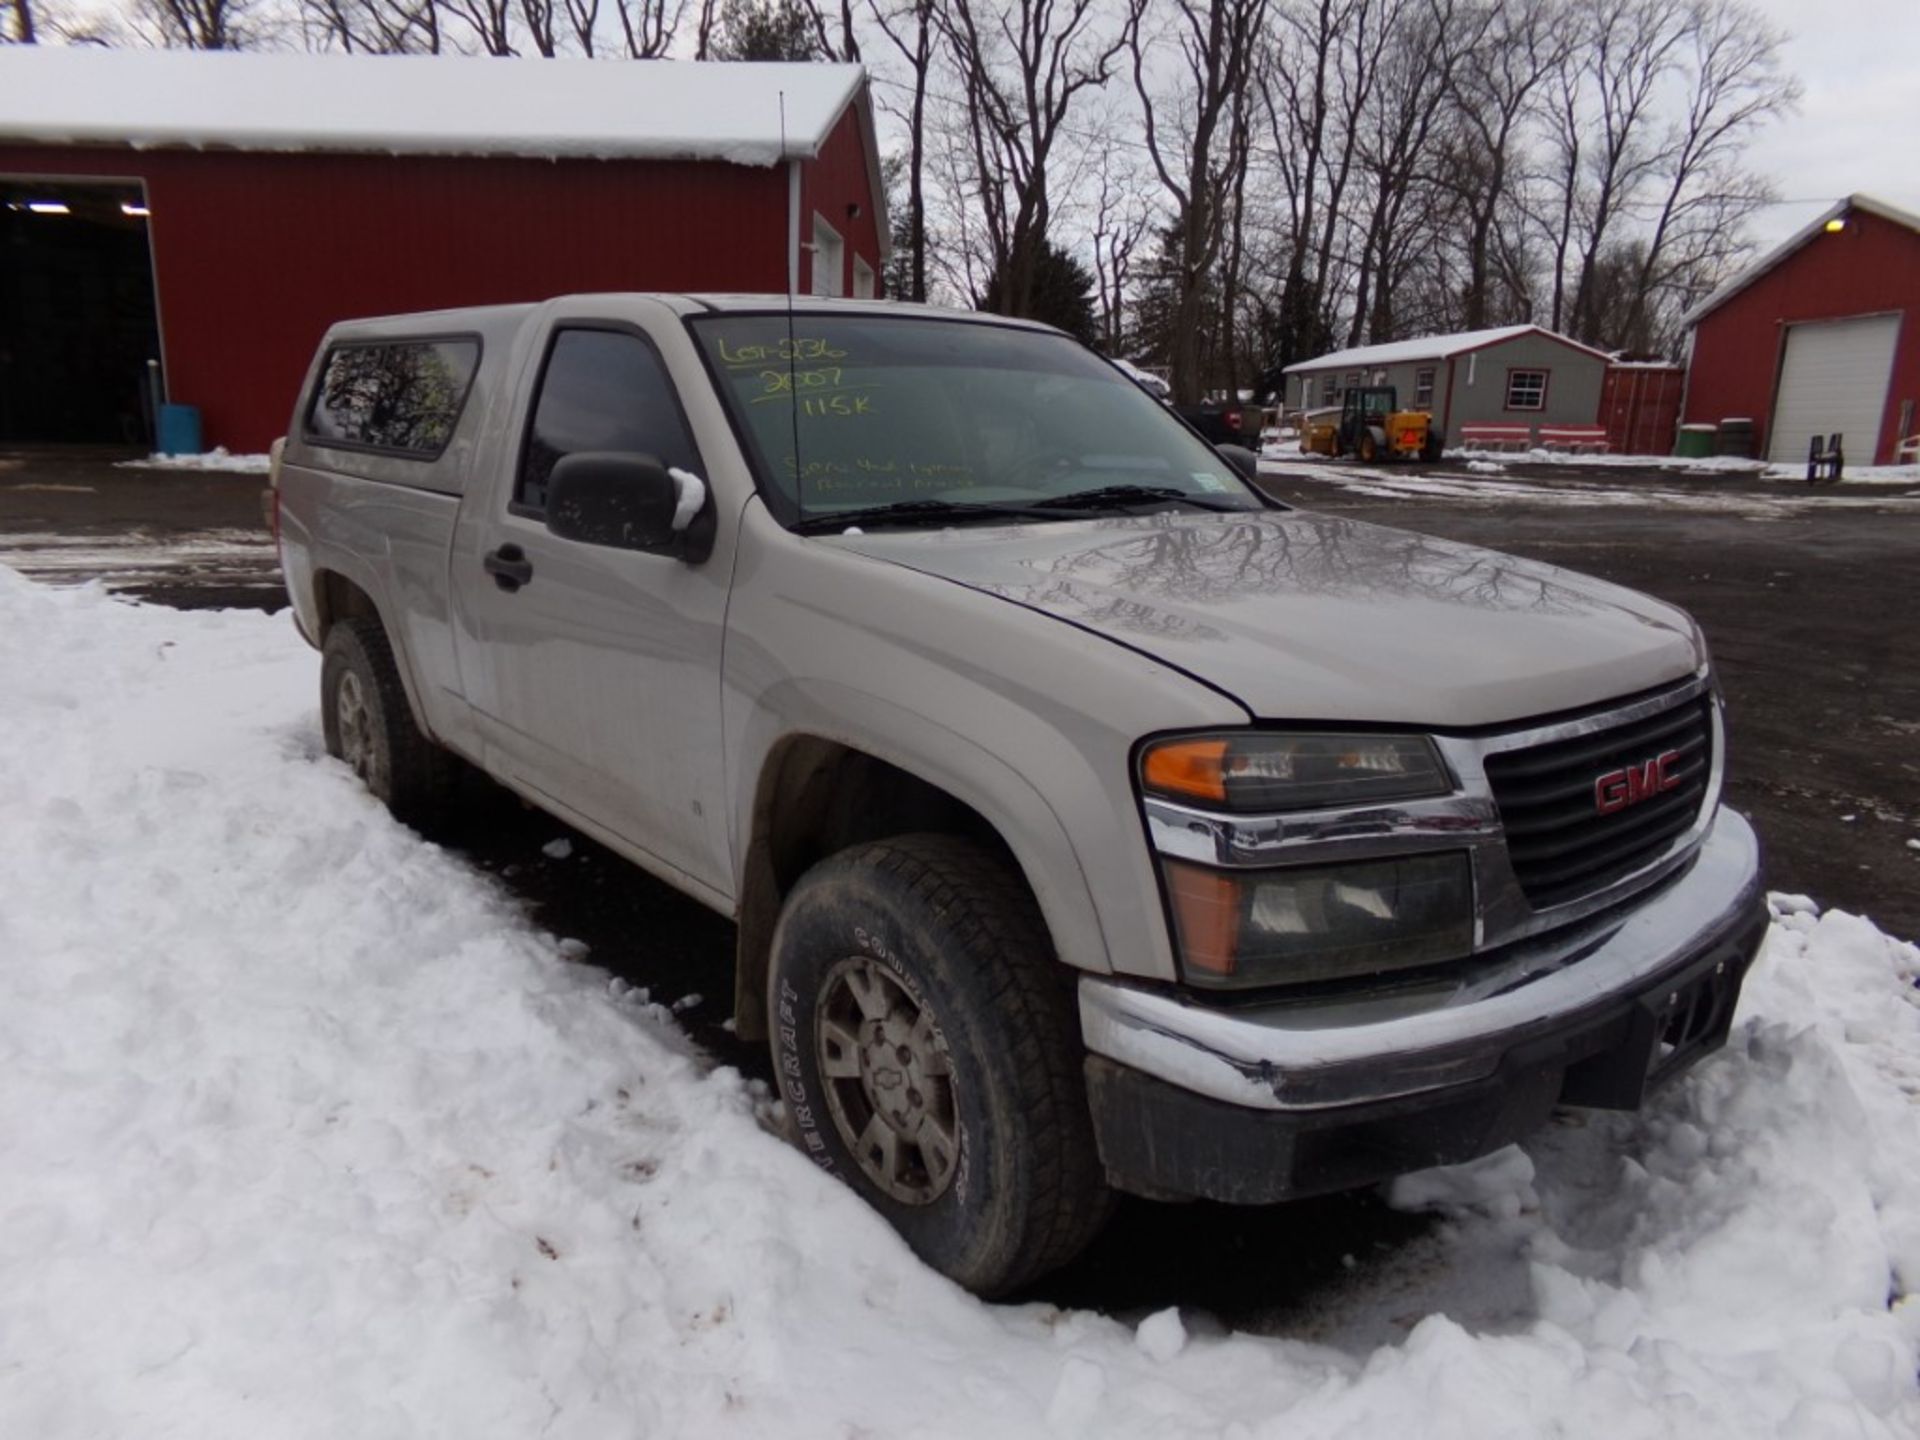 2007 GMC Canyon SL 4X4, Reg Cab, Grey, 115,094 Miles, VIN#1GTDT149778107601 - OPEN TO ALL BUYERS, - Image 4 of 8